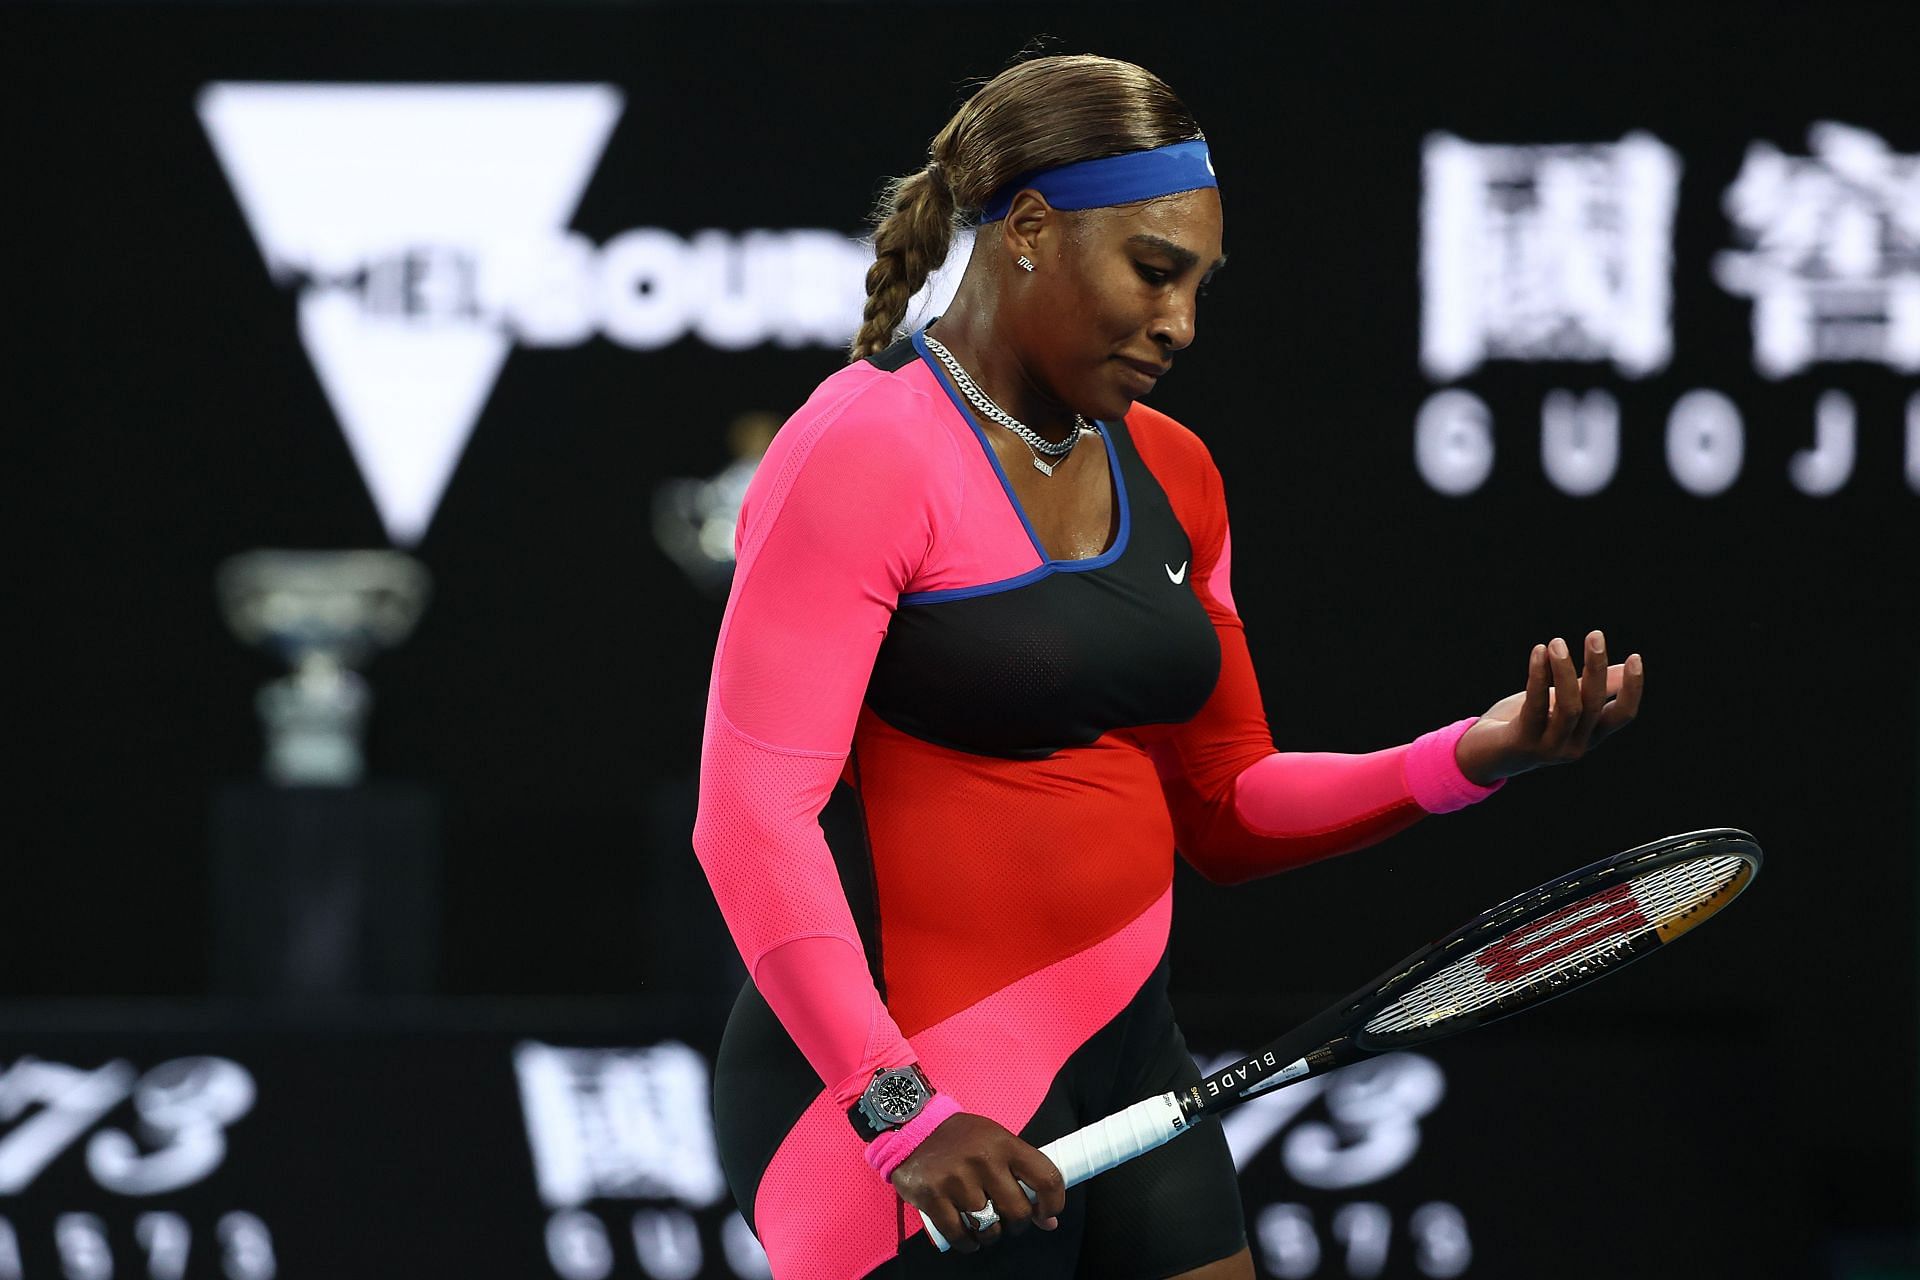 31 women from the US are ranked ahead of Serena Williams in the WTA rankings